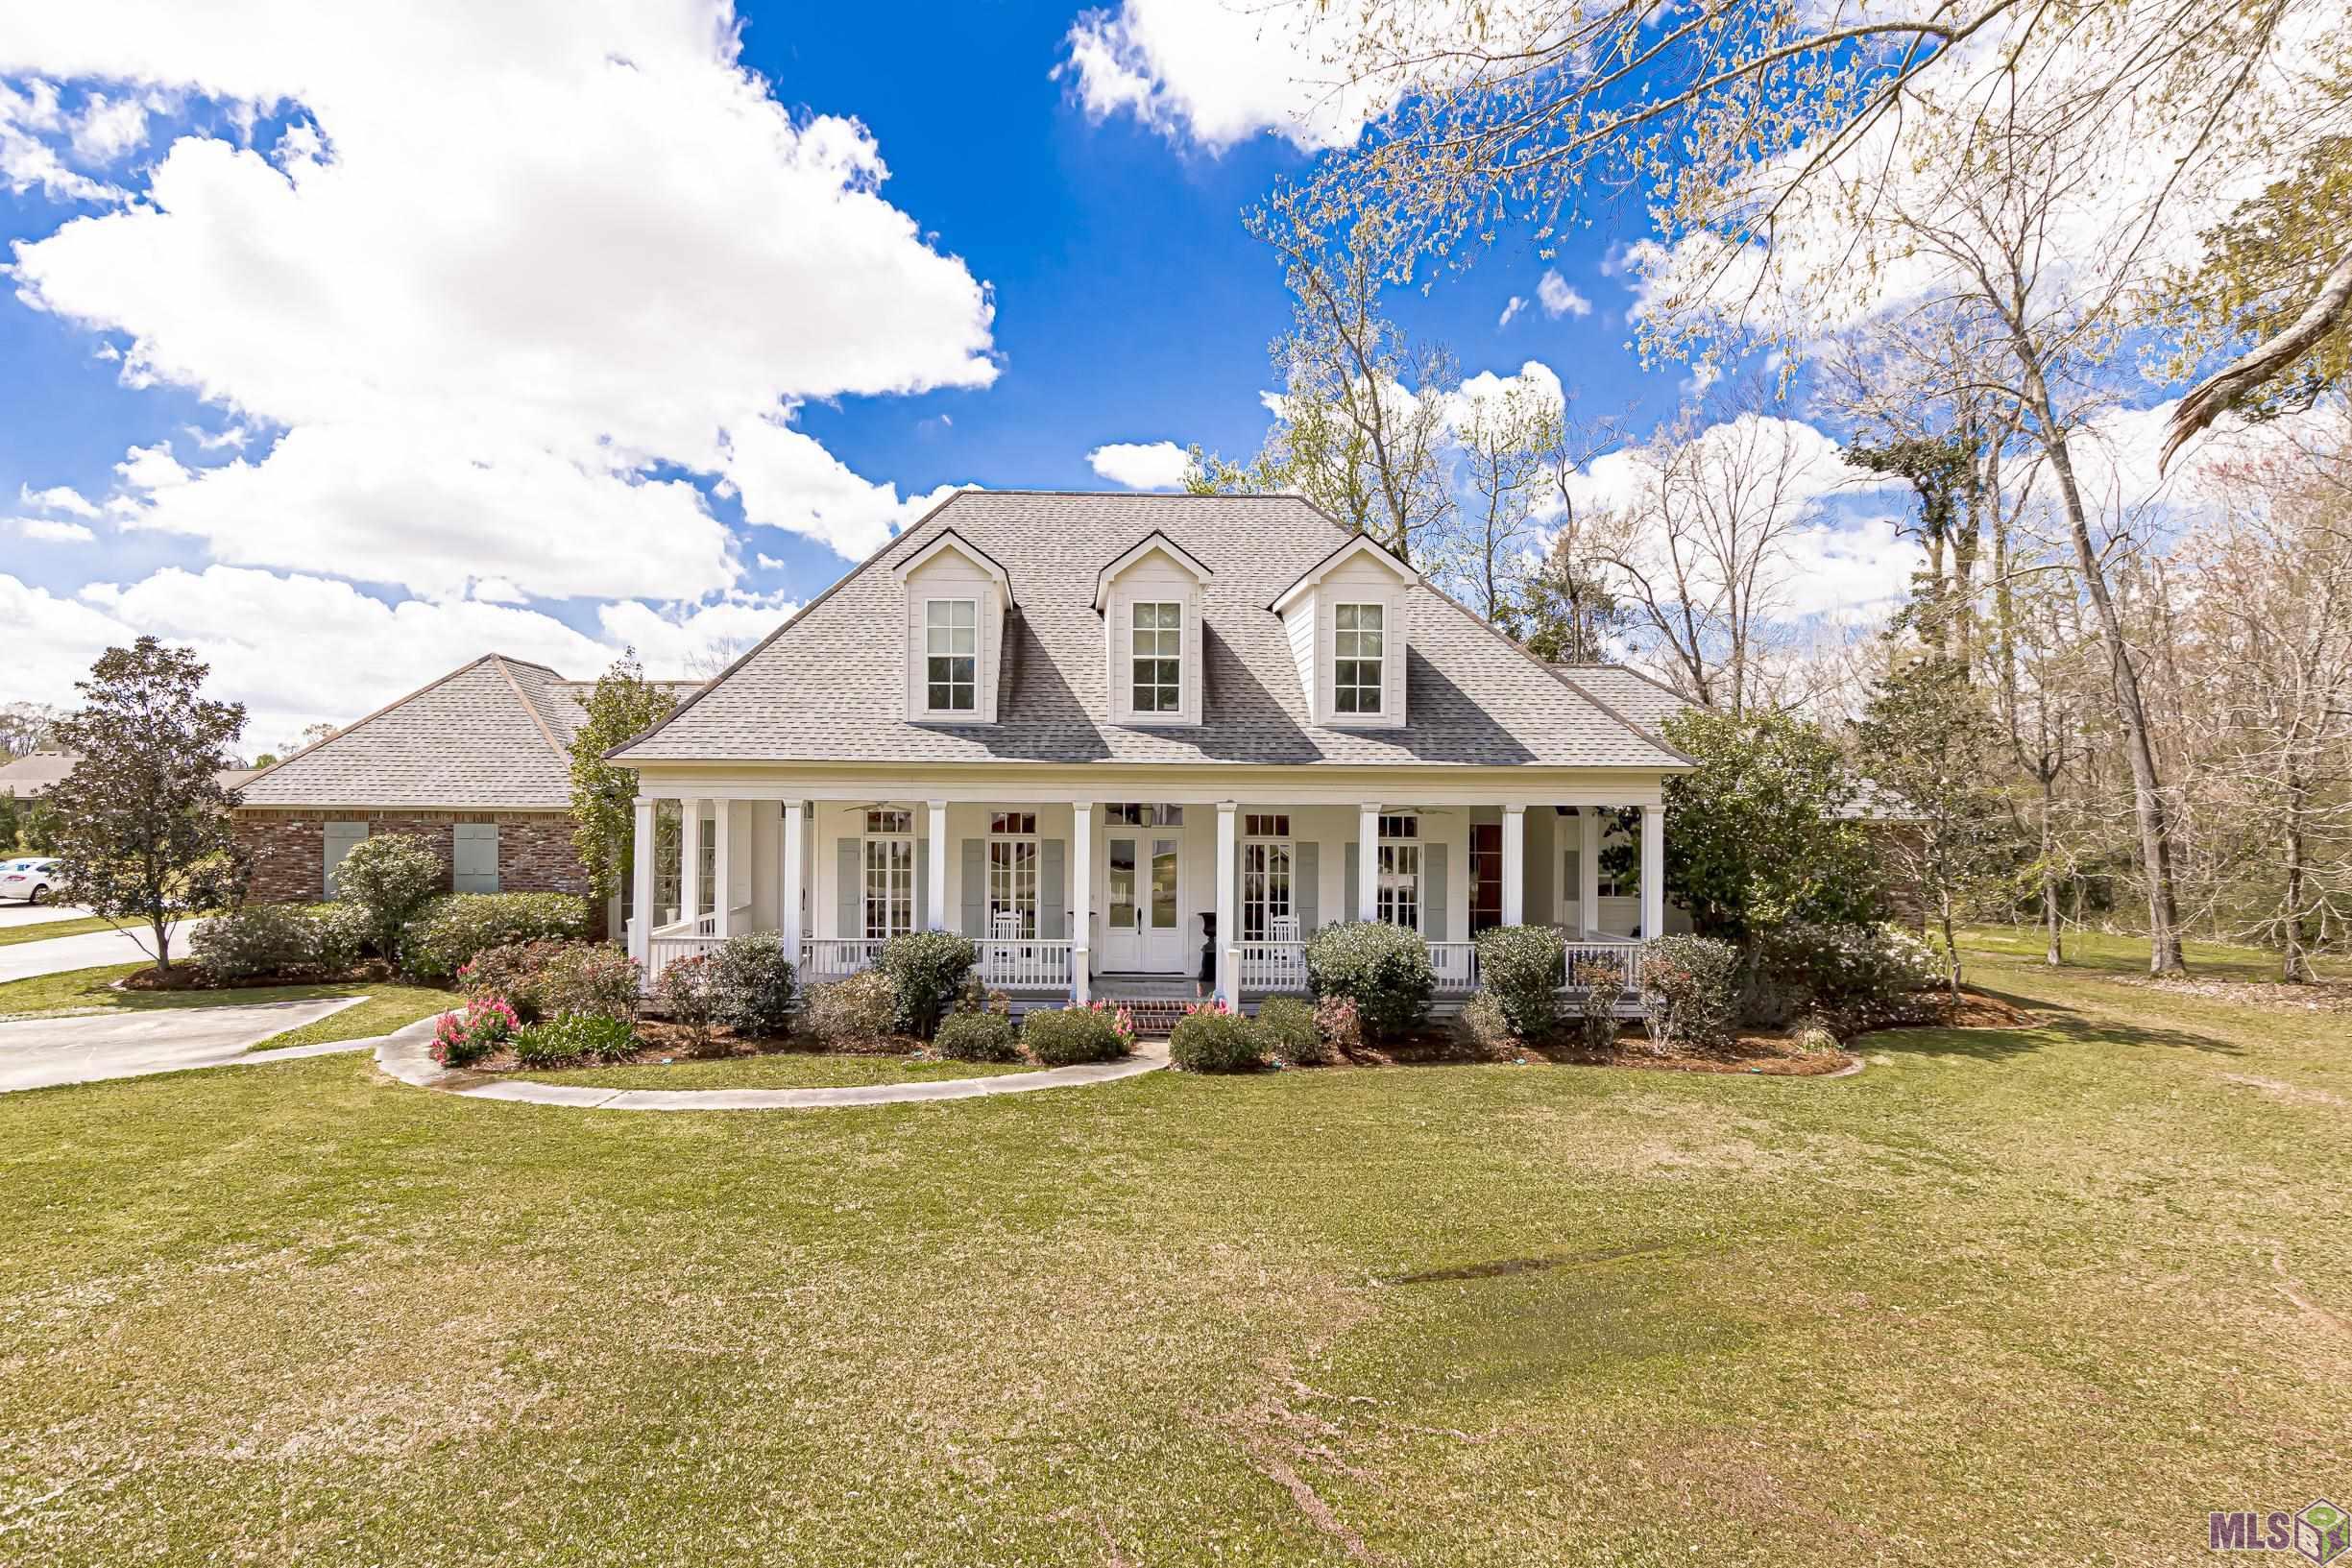 A beautifully built 6000 total square foot 5 bedroom home that sits on over an acre lot! Located in the heart of Prairieville just minutes away from some of the most desired schools and only a few miles from Baton Rouge. This show stopper has it all. Large traditional front porch, presidential office, huge kitchen, mud room, sitting area, and wet bar. This home goes on forever, however its southern charm makes it cozy and a perfect fit for any family. Master bedroom and office are down stairs and remaining bedrooms are upstairs. Custom dirty top pine floors in the main living areas, brick in the kitchen. The custom features of this home can only be truly appreciated in person! Home is not located in a flood zone and HAS NEVER FLOODED Schools include  -Oak Grove Primary  -Prairieville Middle  -Dutchtown High